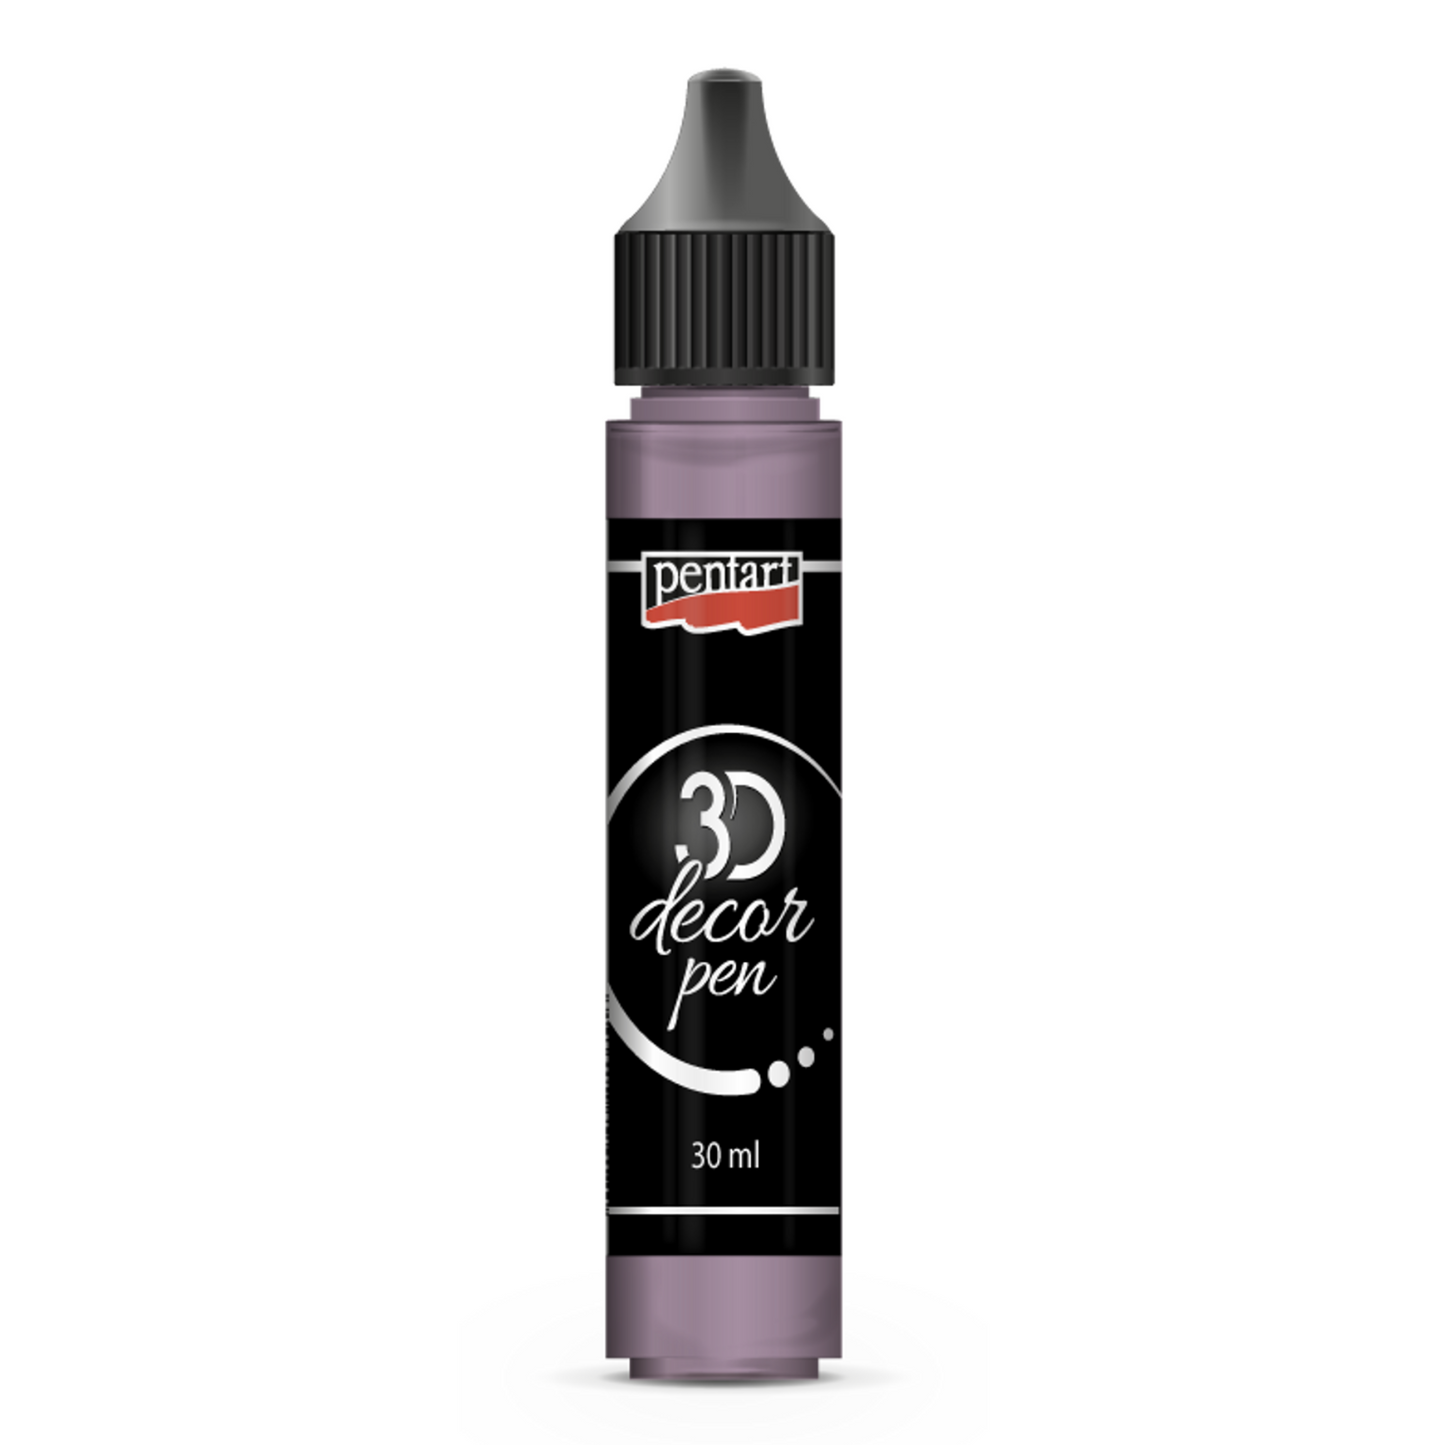 3D Decor Pen Red Copper by Pentart 30 ml available at Milton's Daughter.